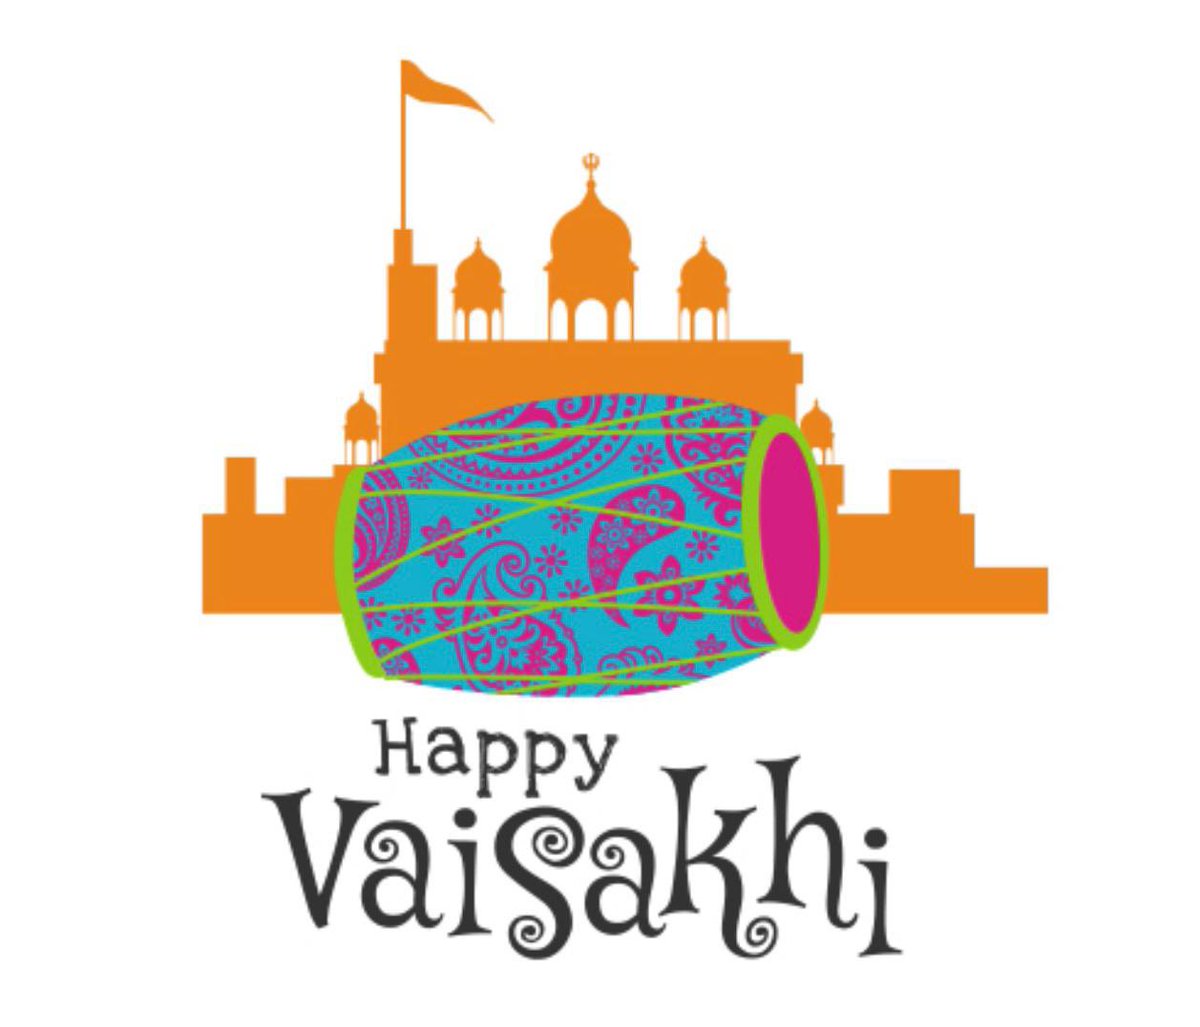 Happy Vaisakhi to all celebrating @WestHertsNHS @bame_connect @kellyMcgovern21